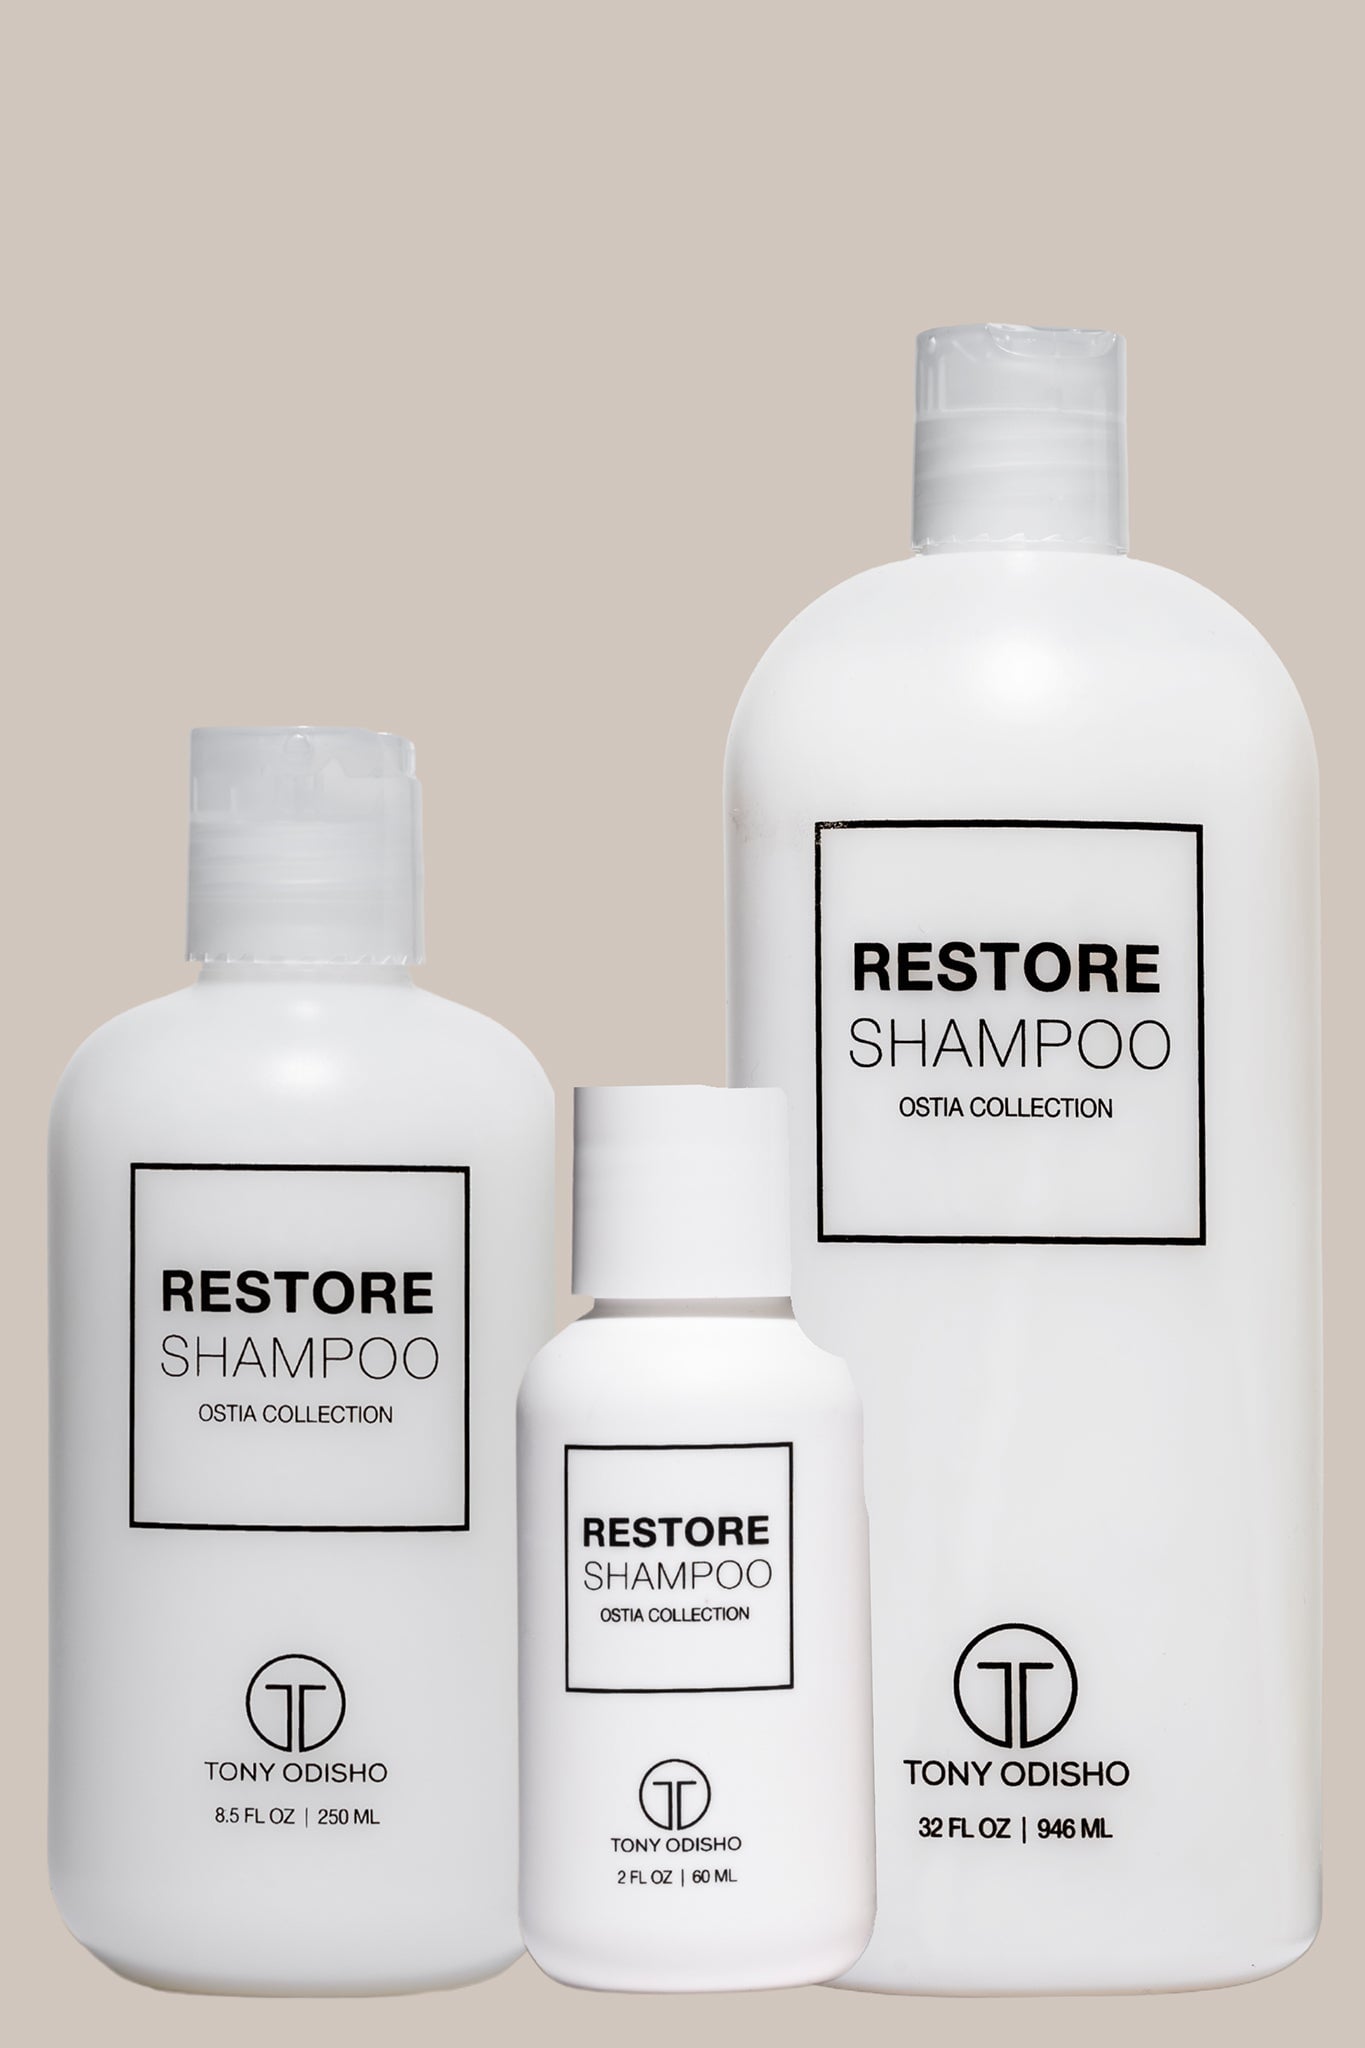 Ostia Collection Restore Shampoo | Helps Rebuild and Revive your Hair from Color, Heat Styling and More - Image 1